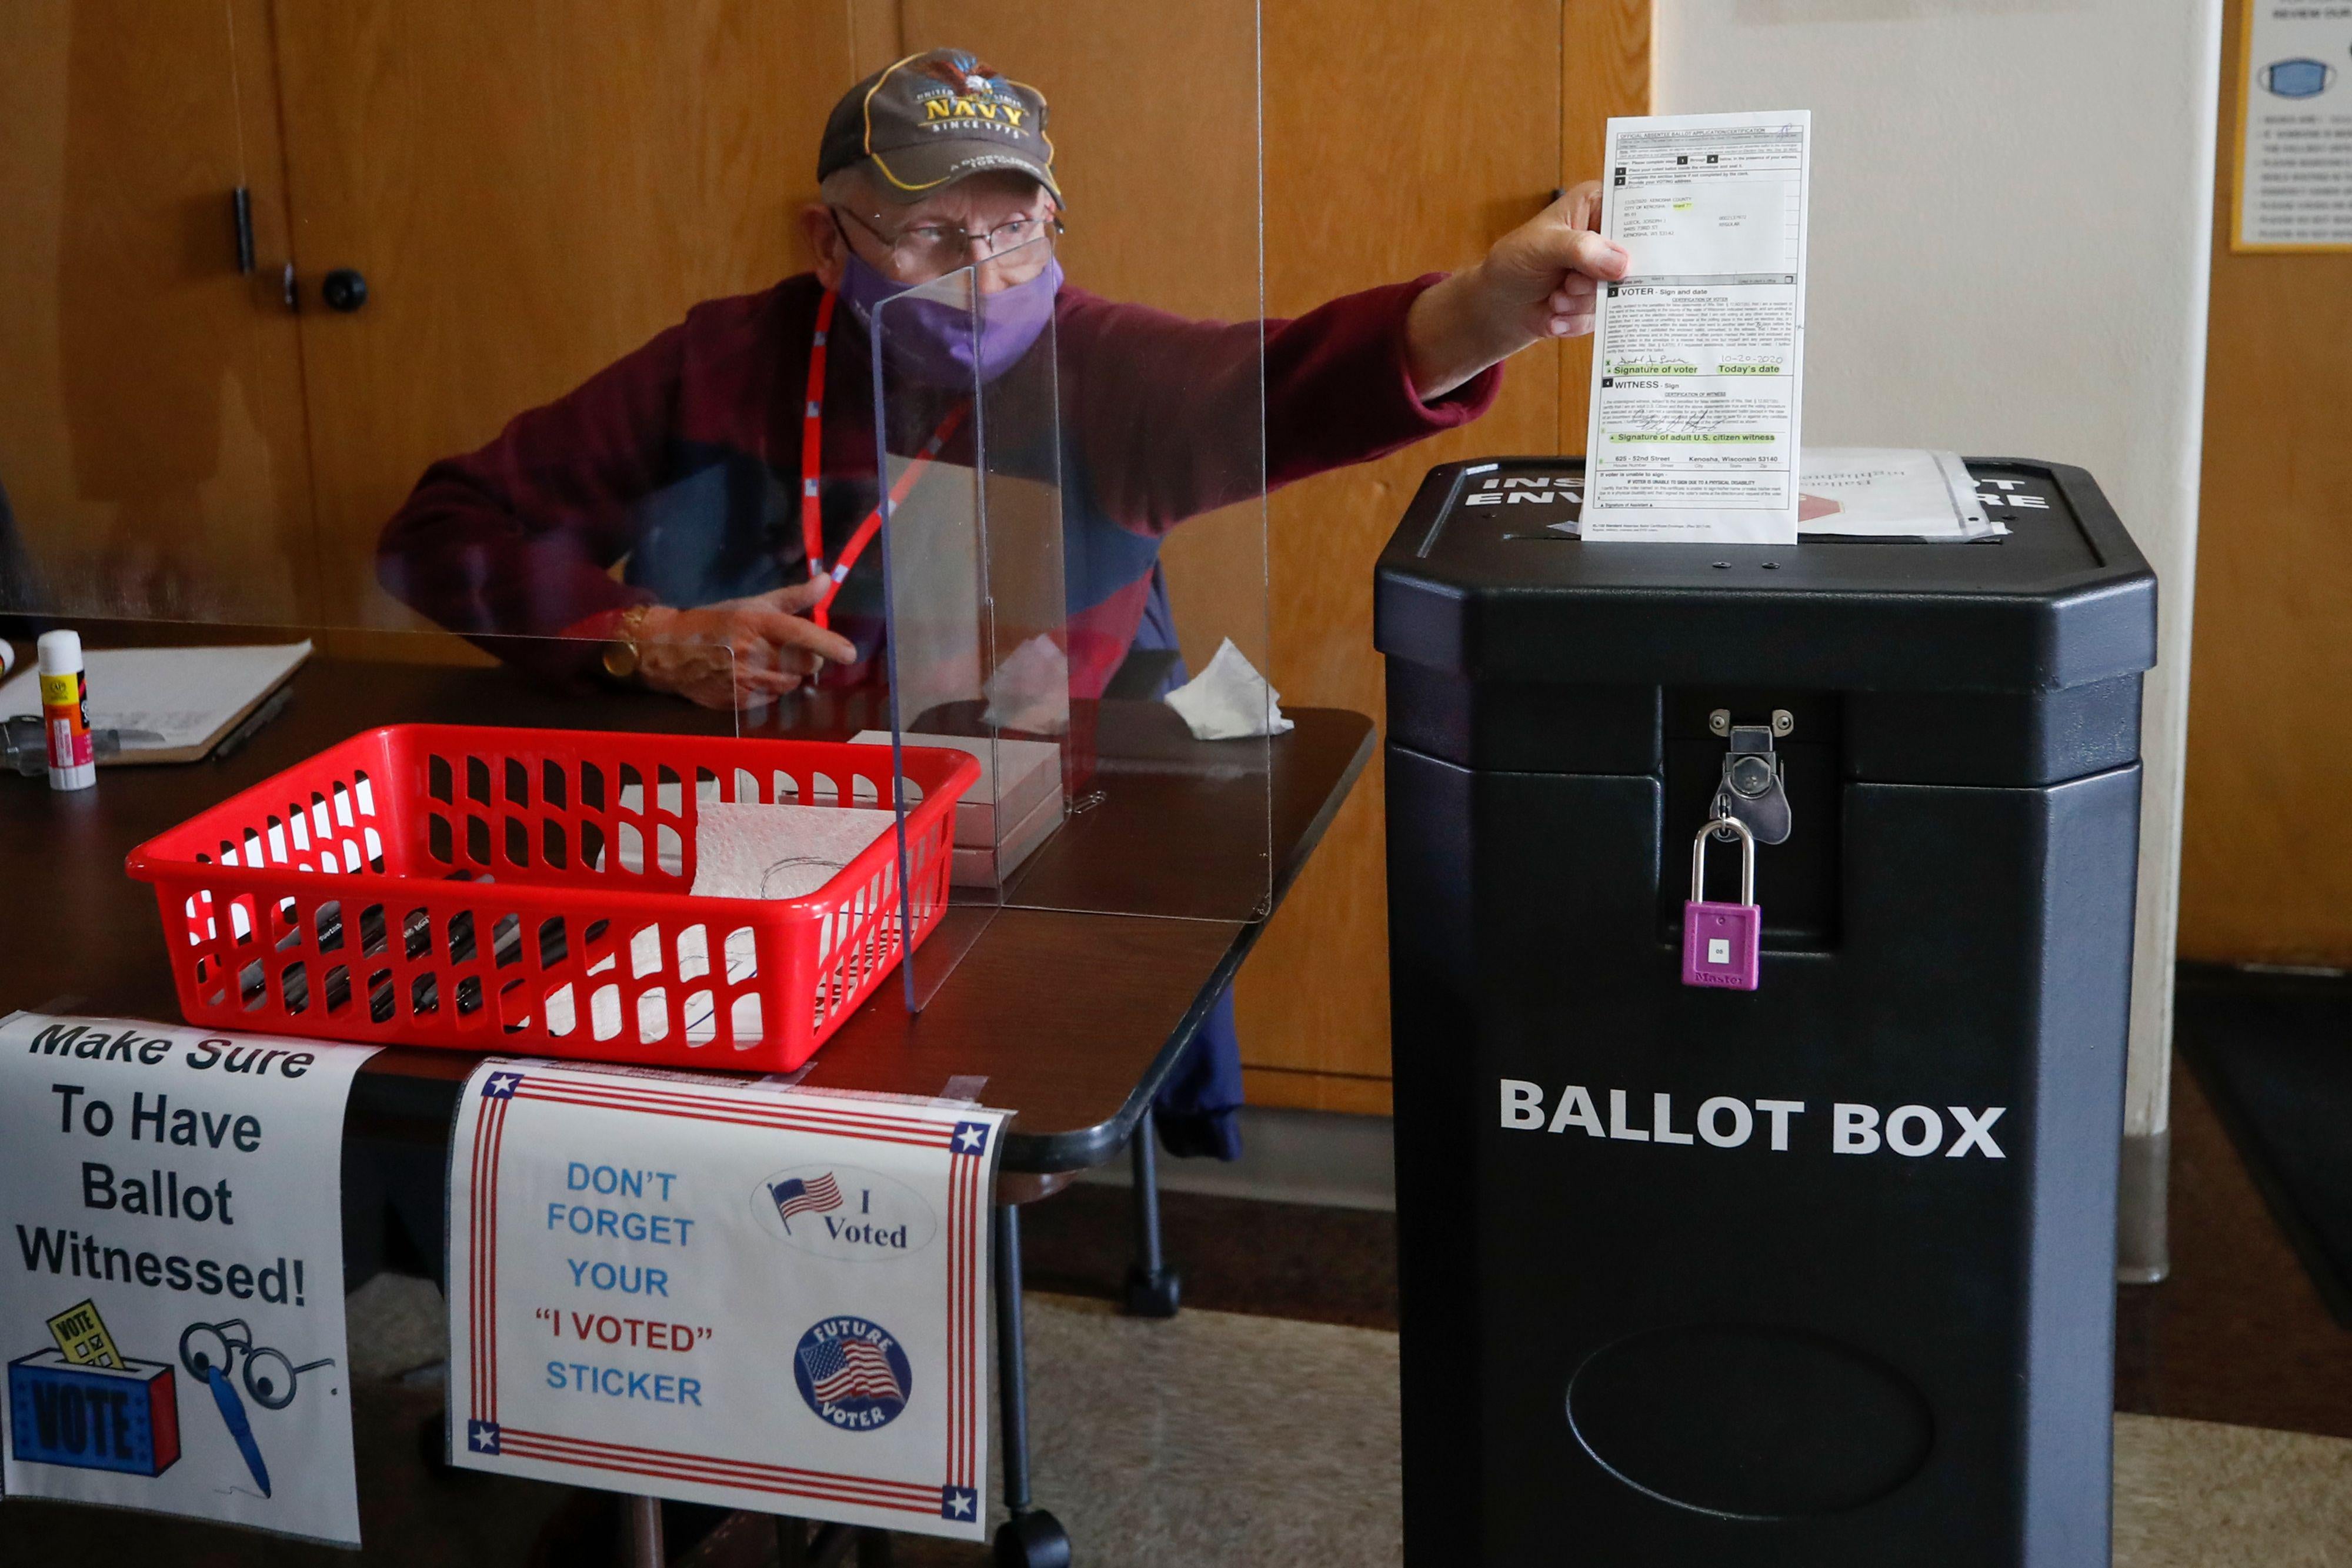 An election worker wearing a mask reaches across the table he's sitting at to drop a ballot in the slot of a ballot box